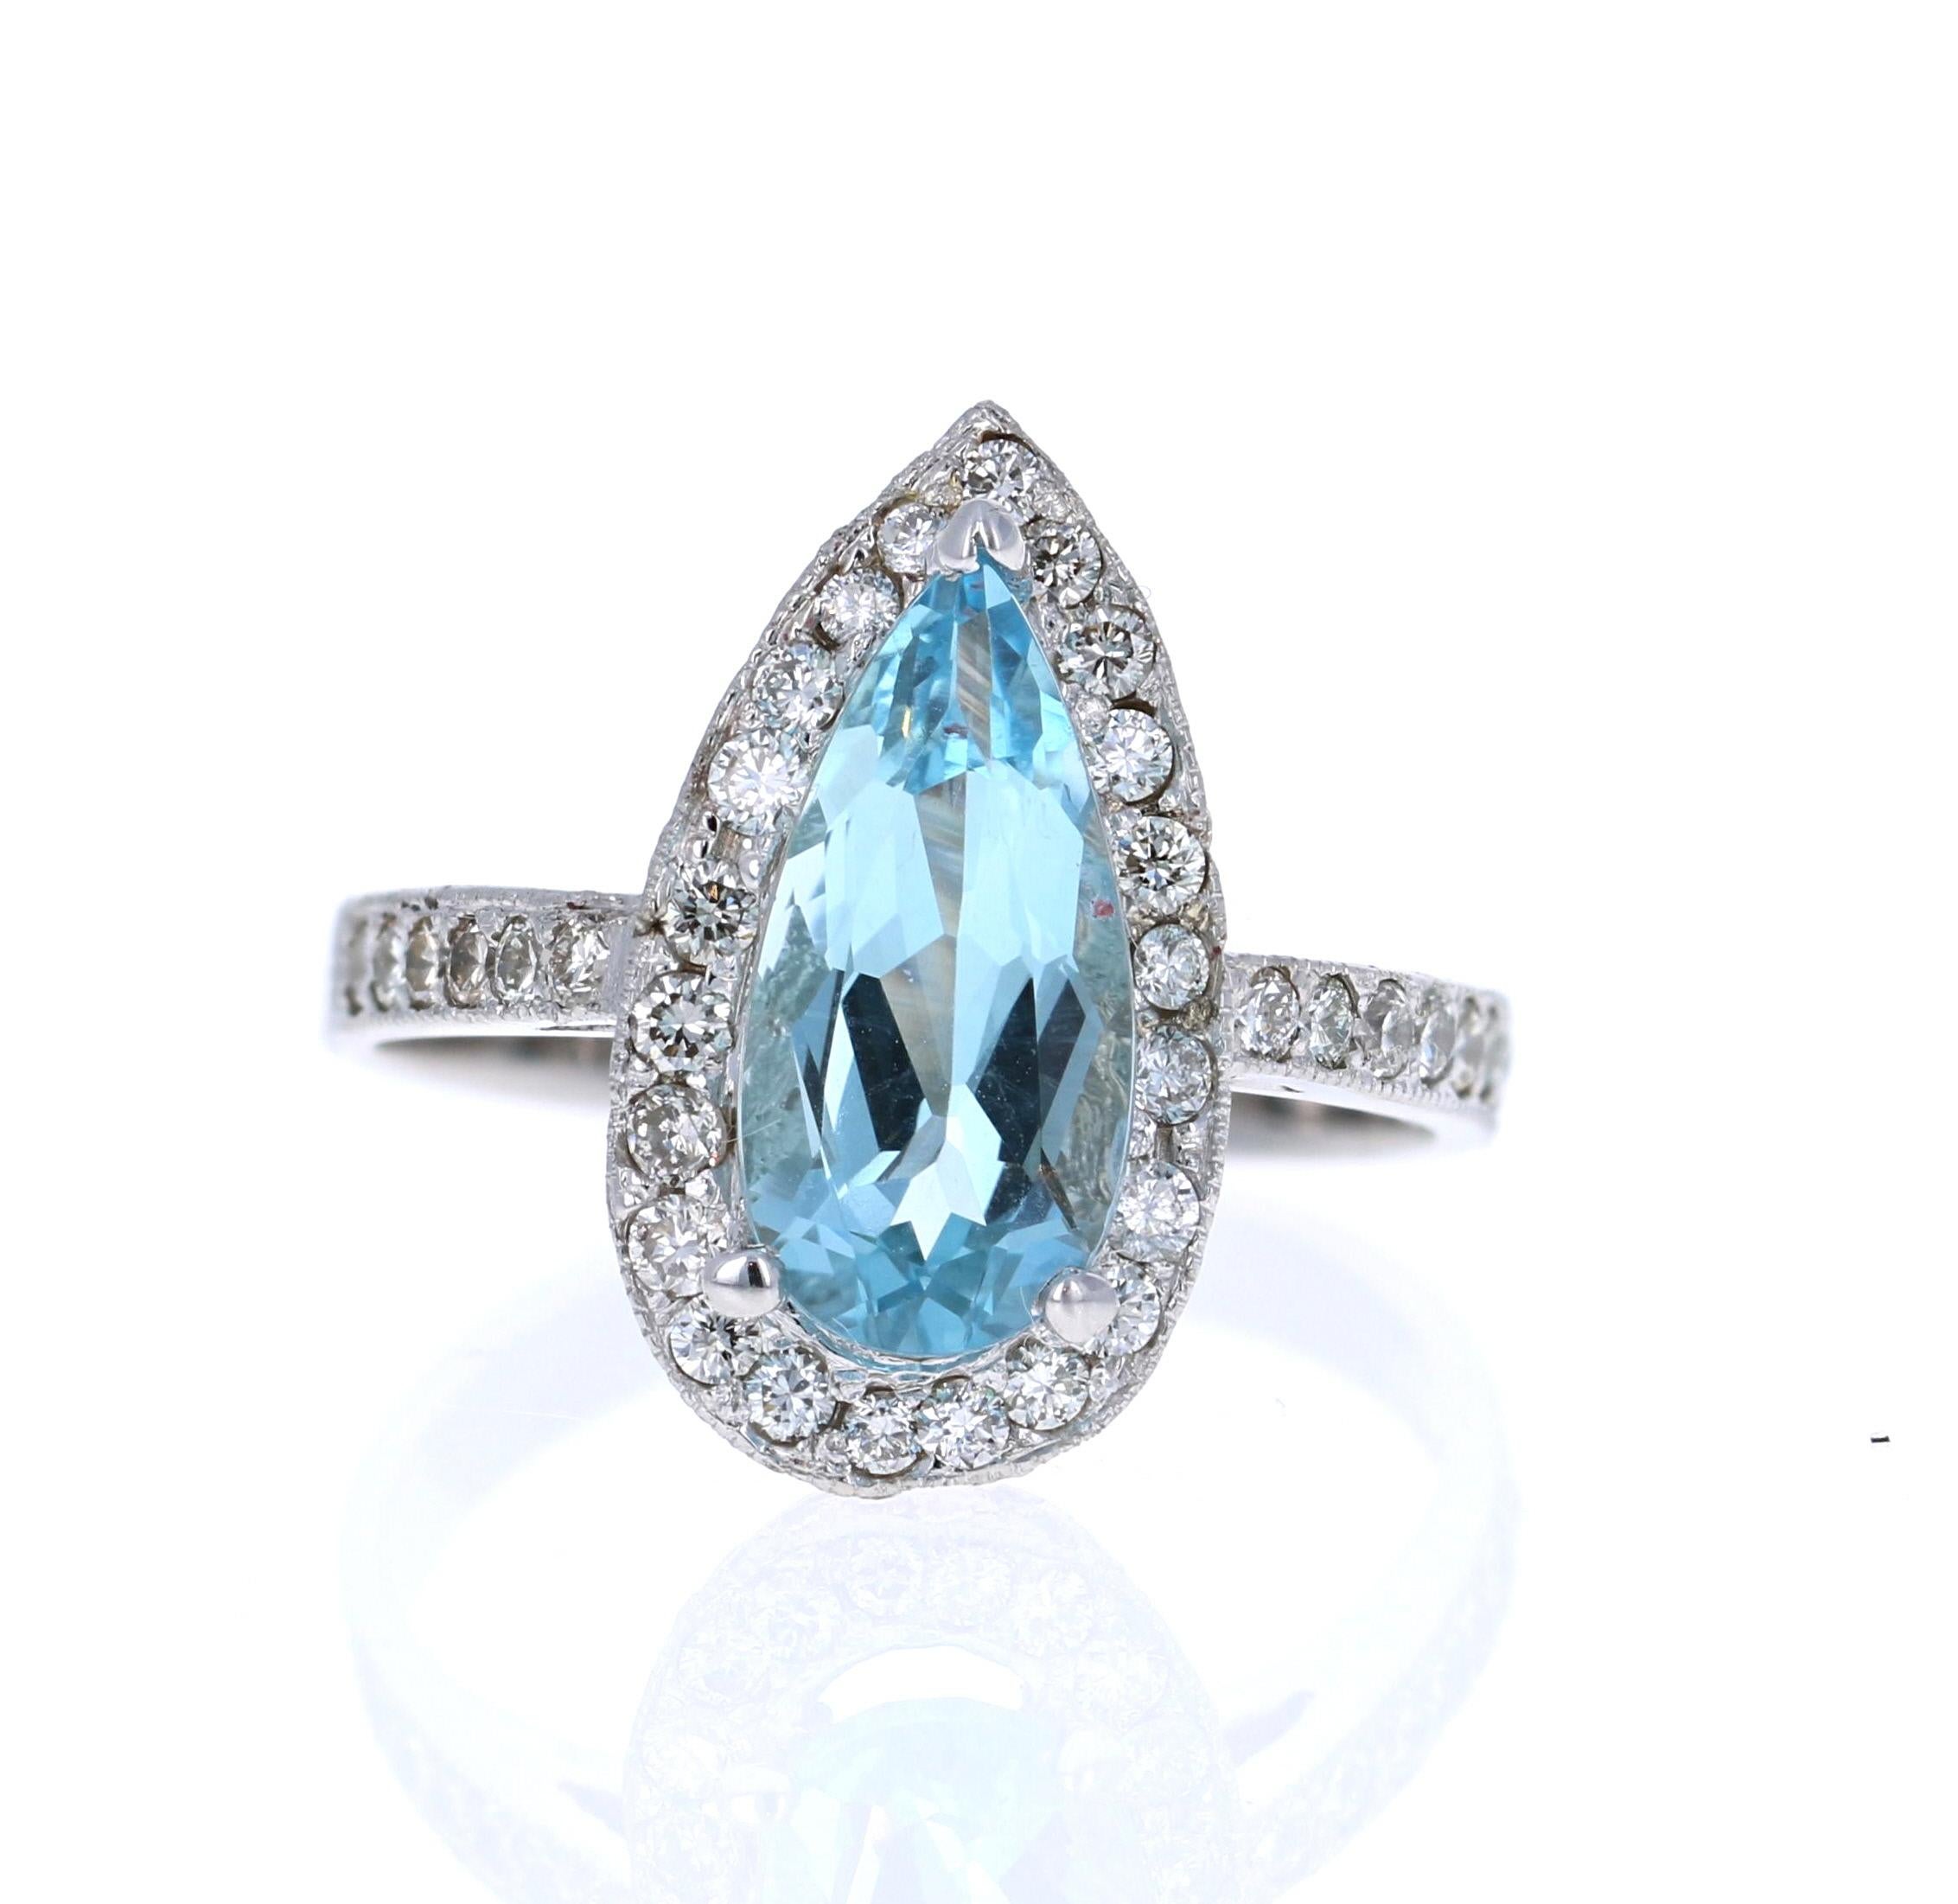 Stunning and Classic Pear Cut Aquamarine and Diamond Masterpiece
This ring has a beautiful 1.95 Carat Pear Cut Aquamarine set in the center of the ring and is surrounded by a Halo of 38 Round Cut Diamonds that weigh 1.00 Carats.  The Total Carat